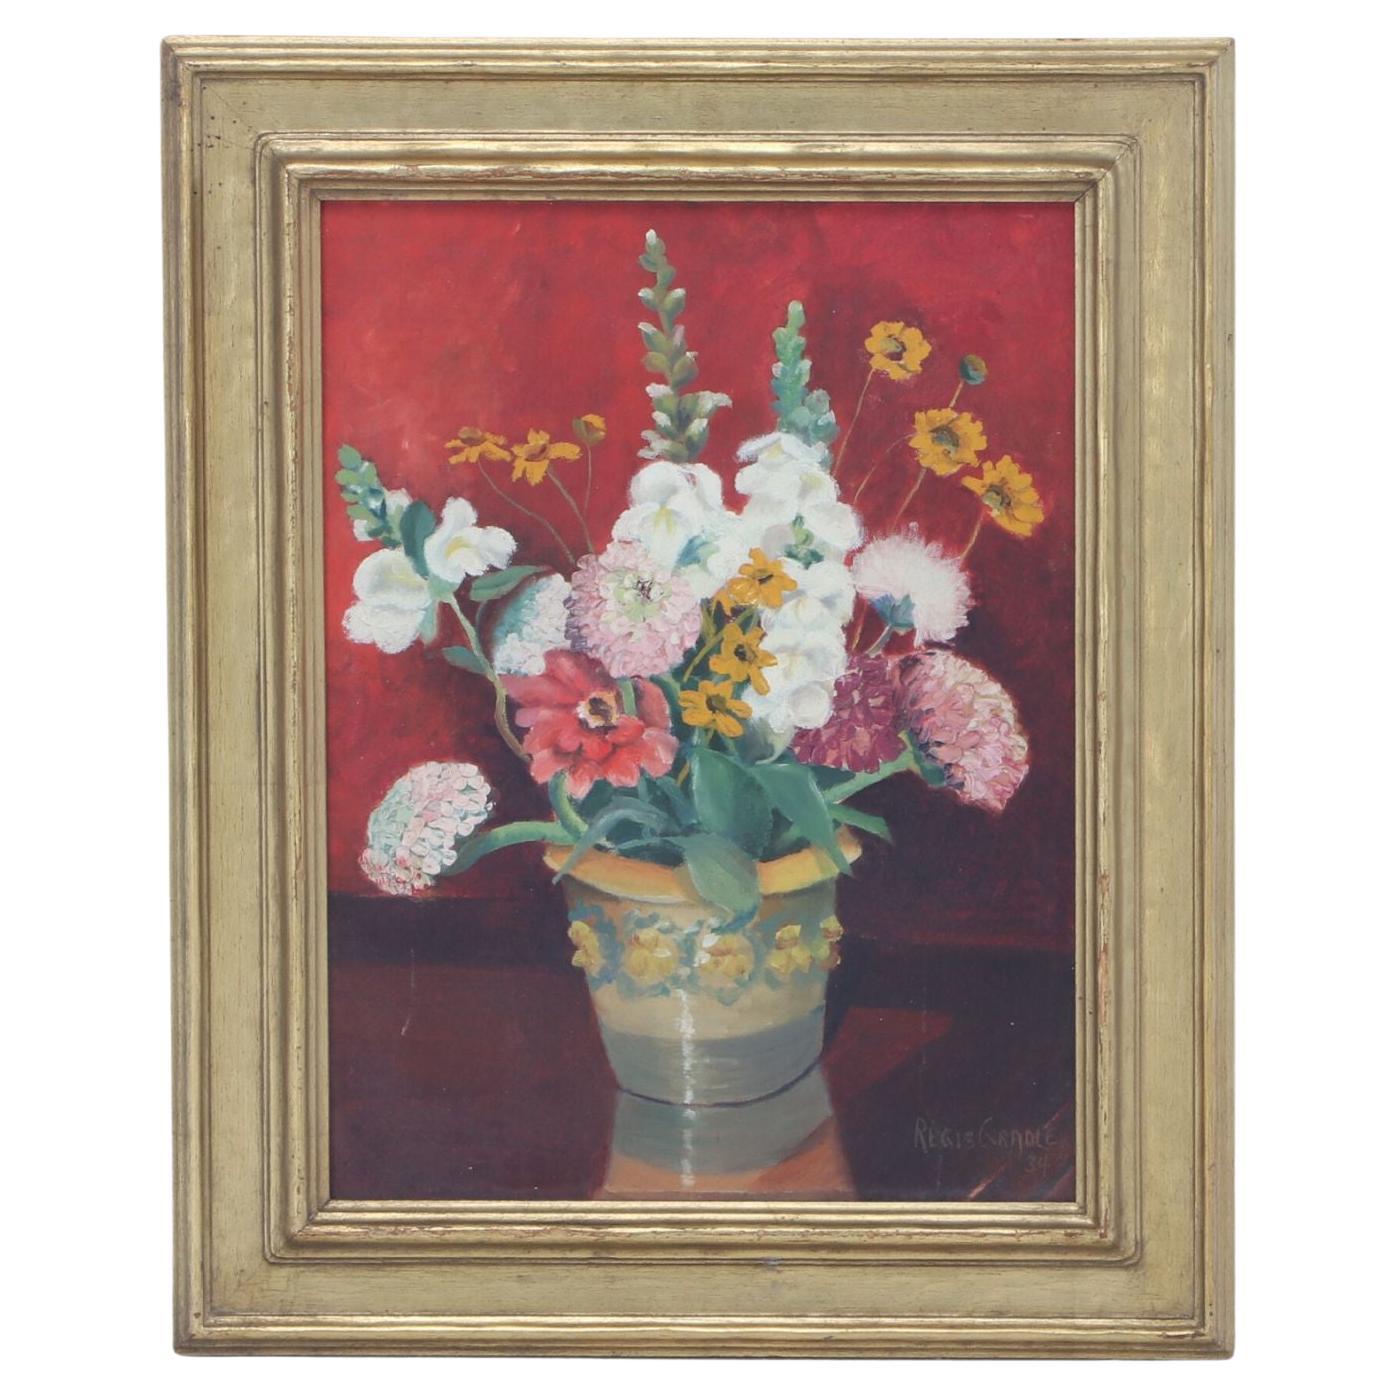 Early 20th Century Original Still Life Floral Oil Painting on Board